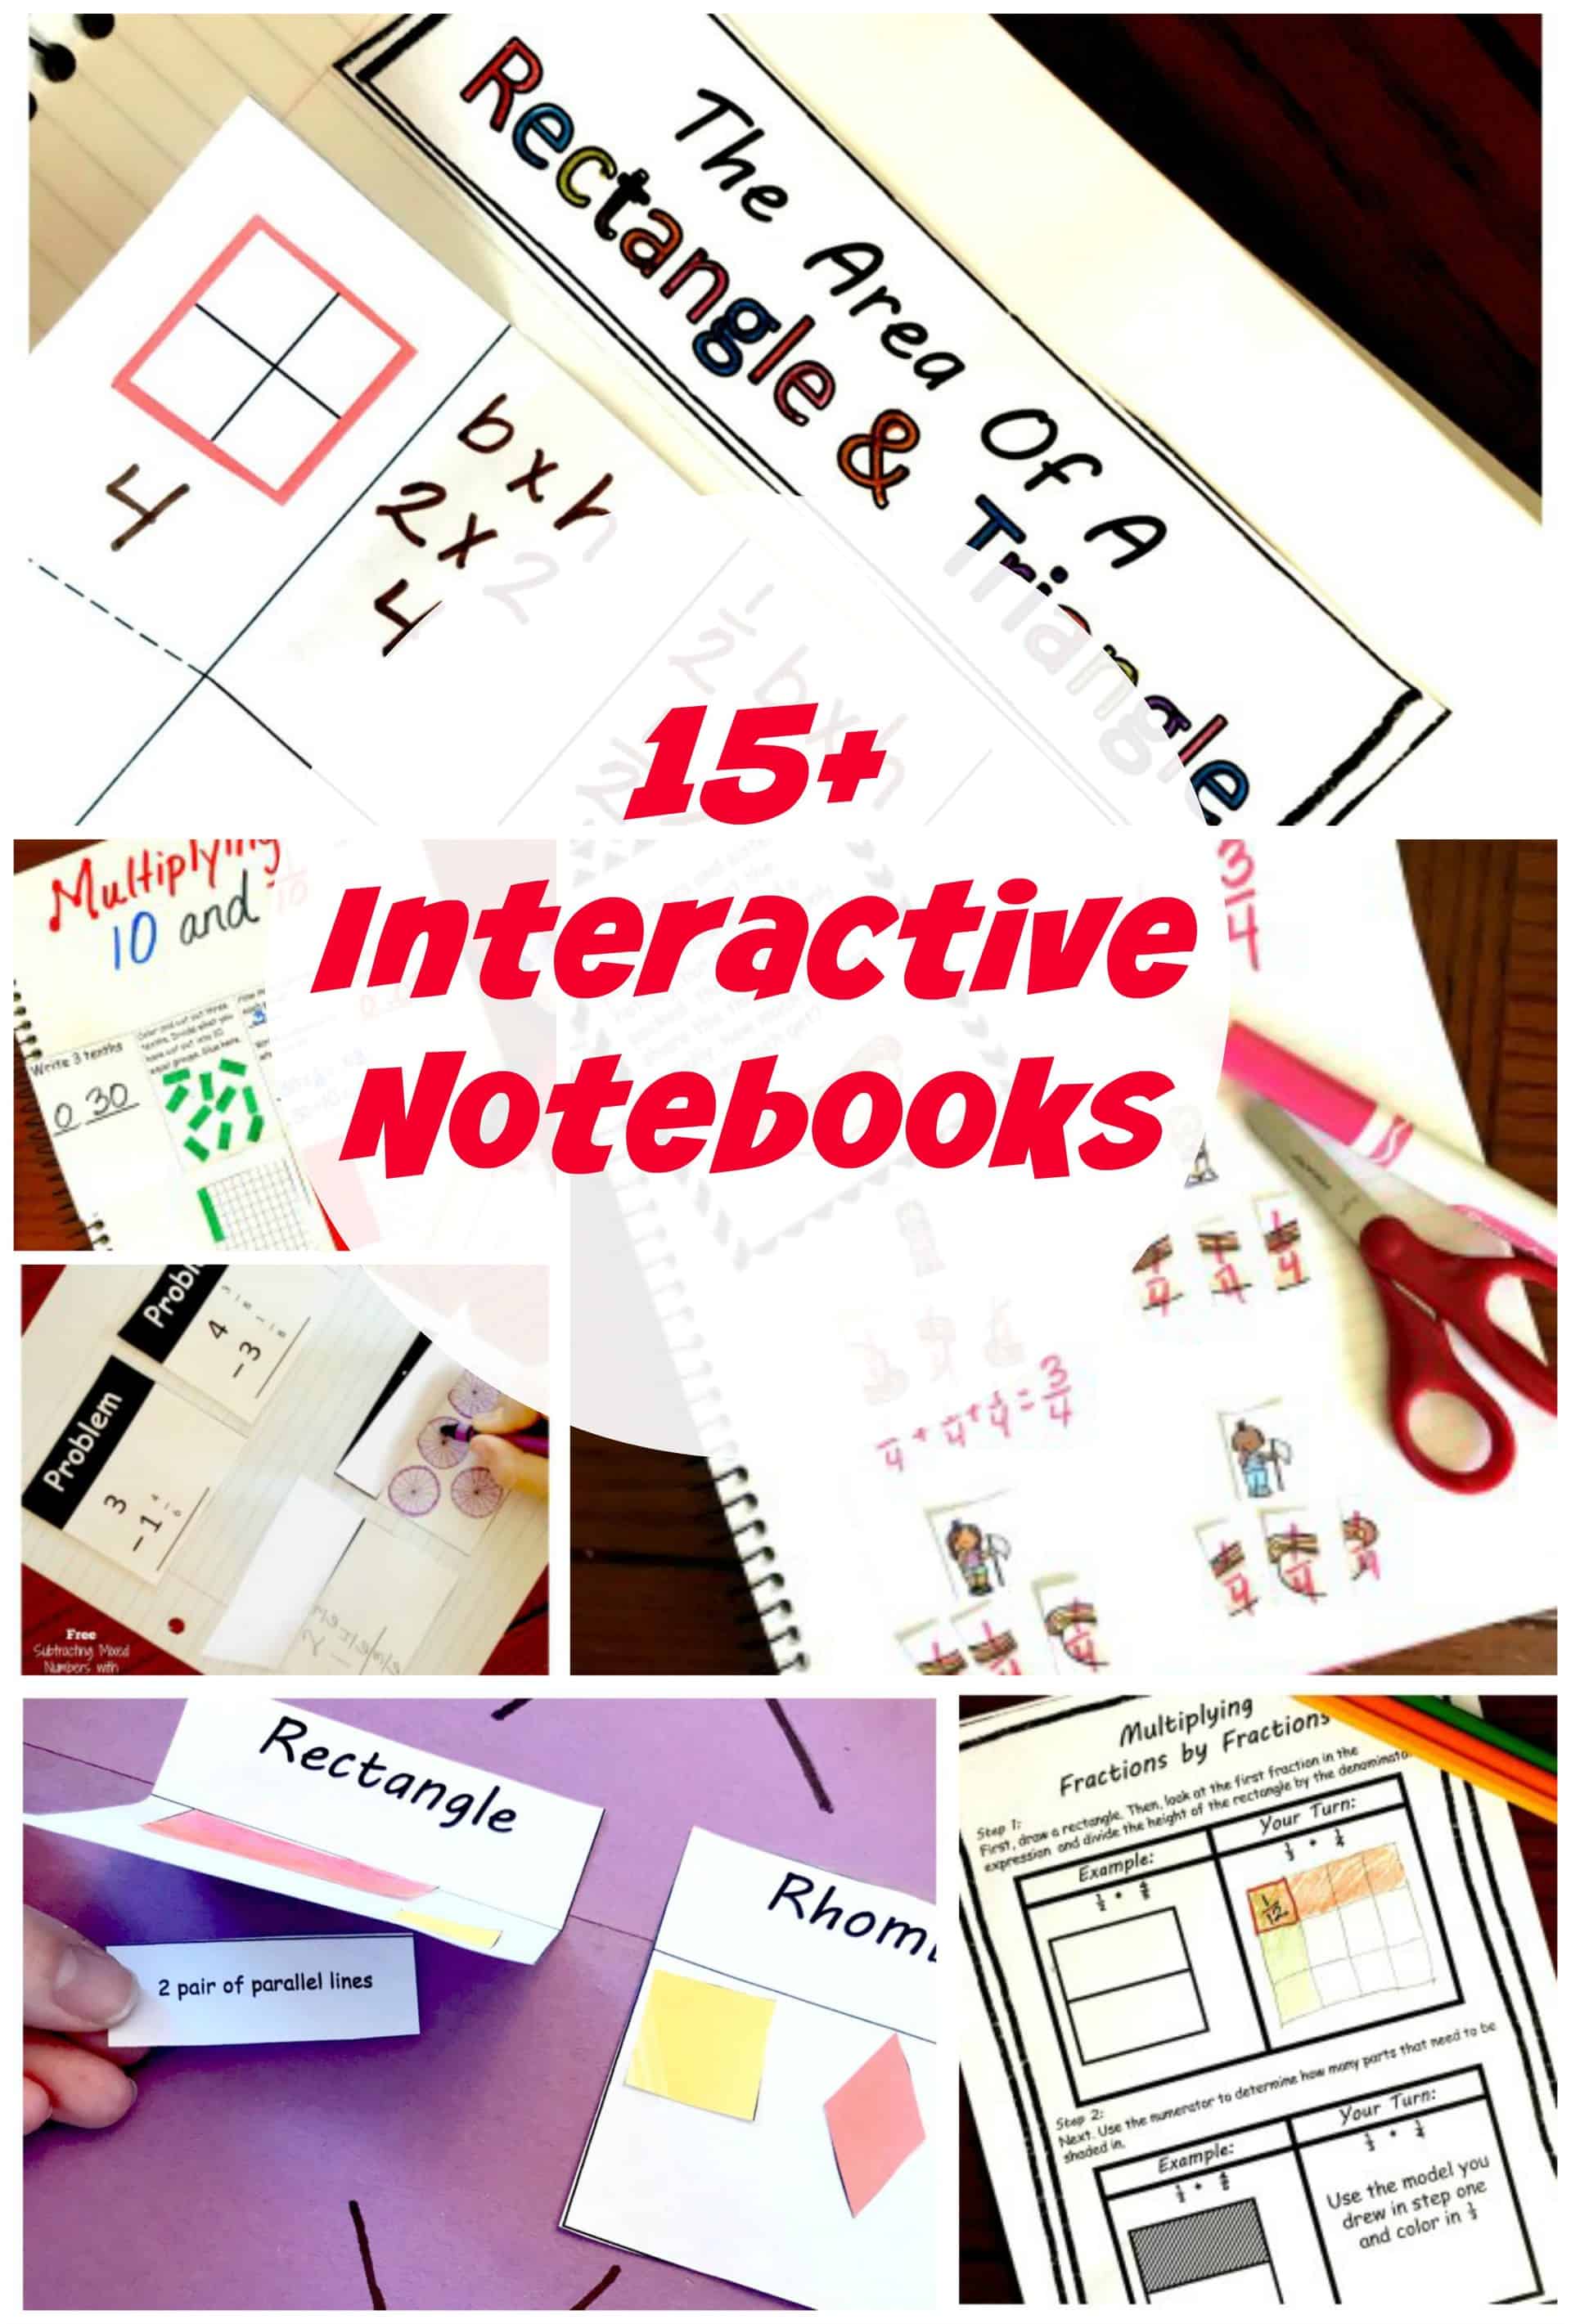 17 Free Interactive Notebooks for Elementary Students | Math